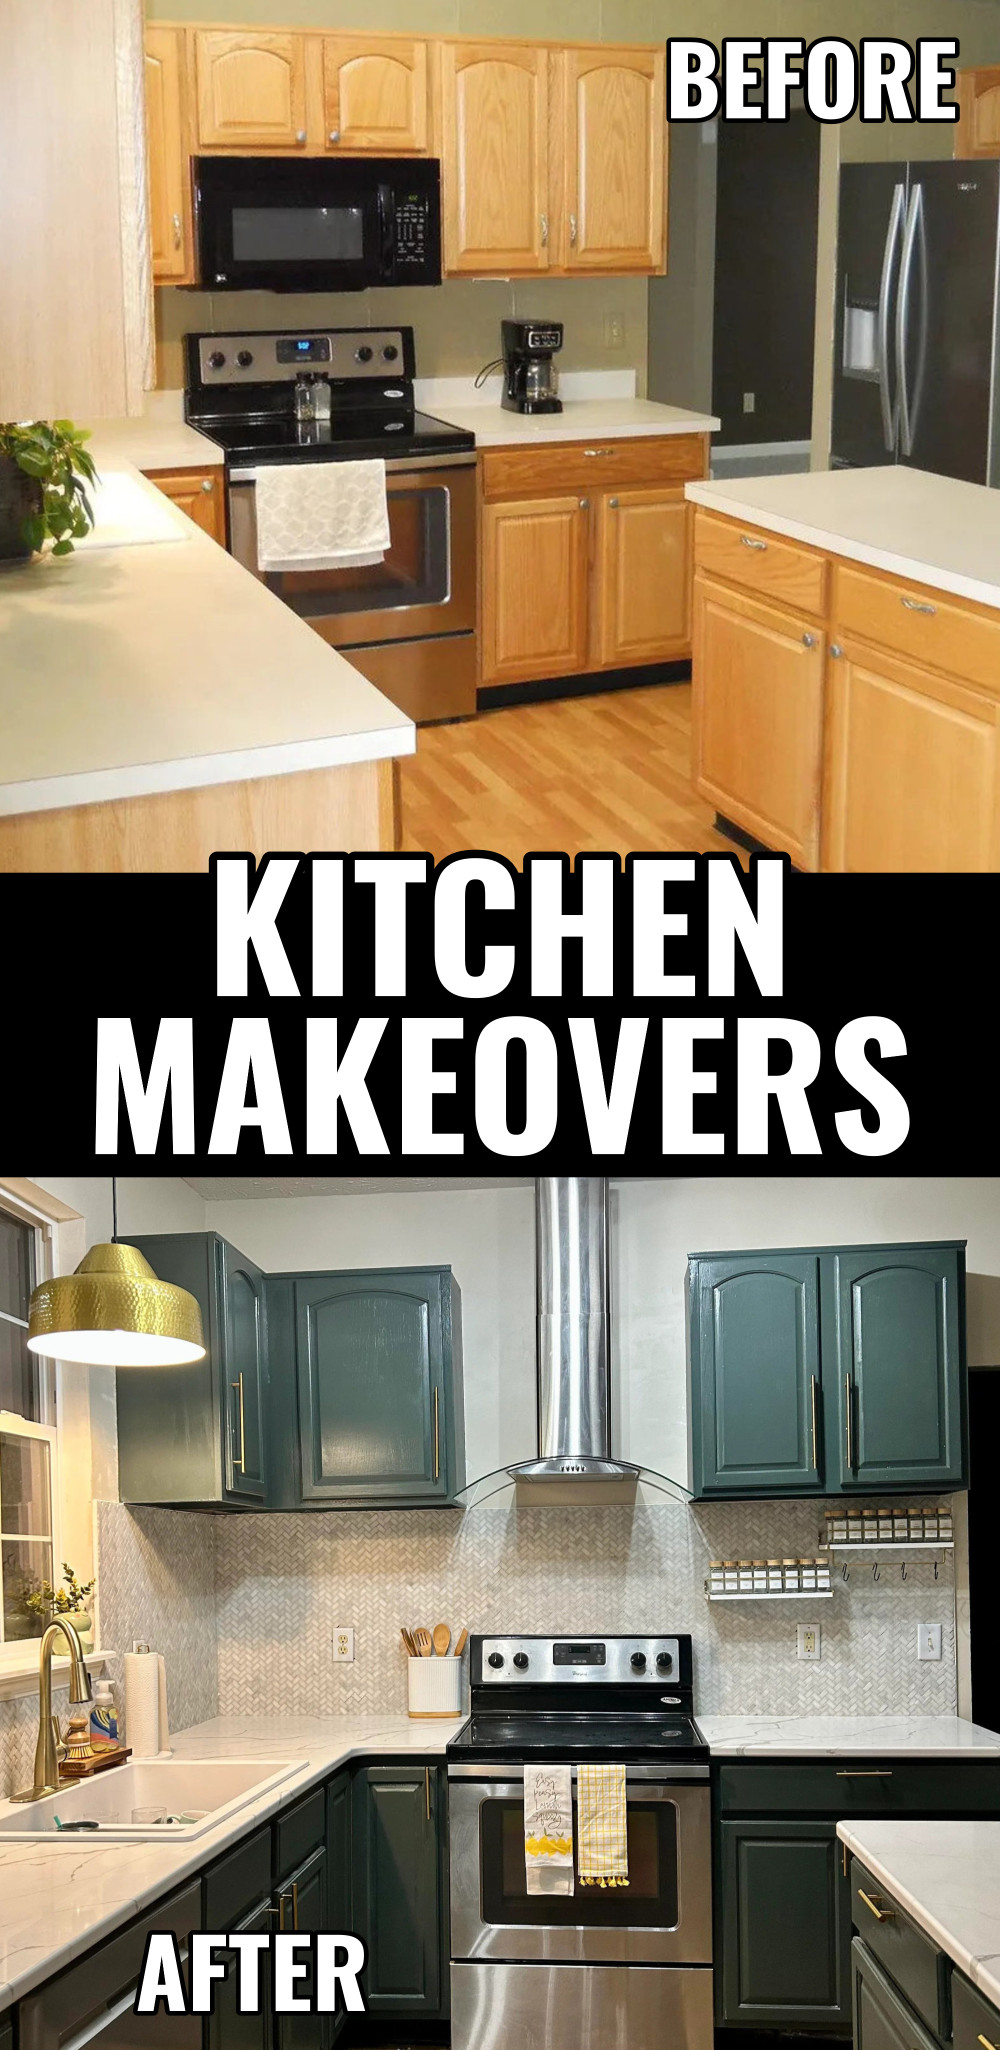 Kitchen Makeovers Before and After